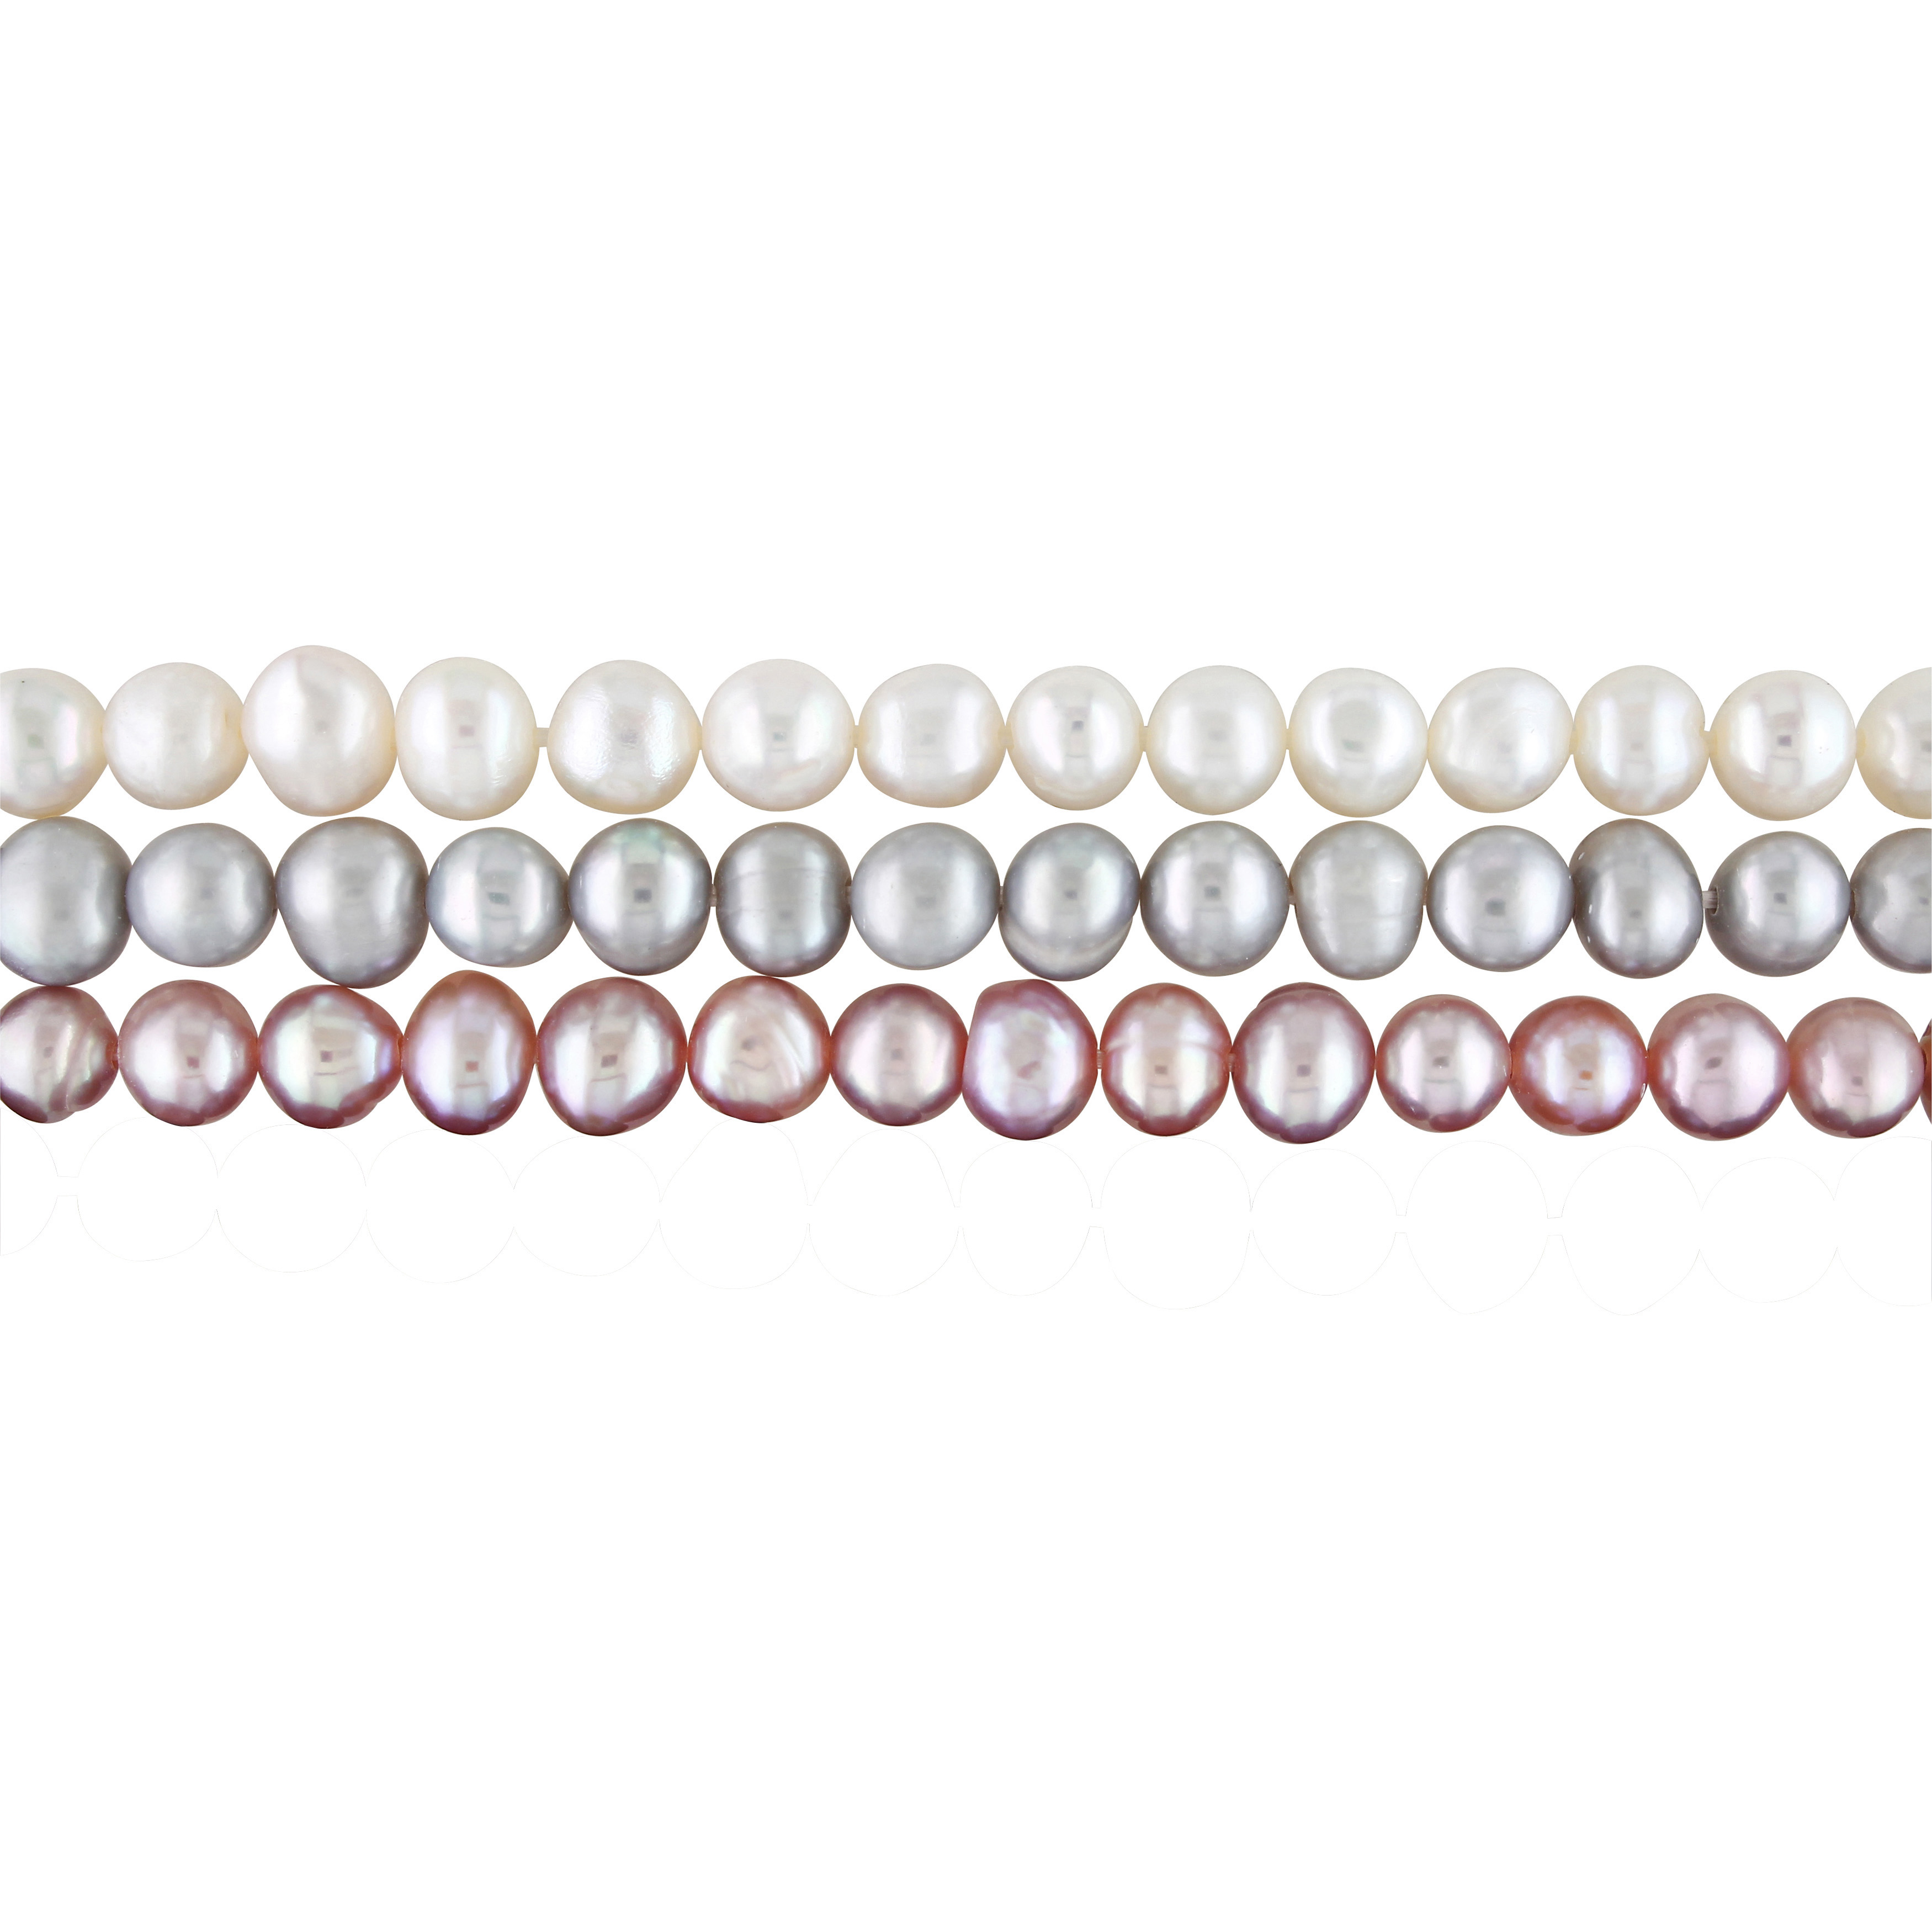 5-5.5 MM White, Pink and Grey Freshwater Cultured Pearl Bracelet Set of 3 with Ribbon